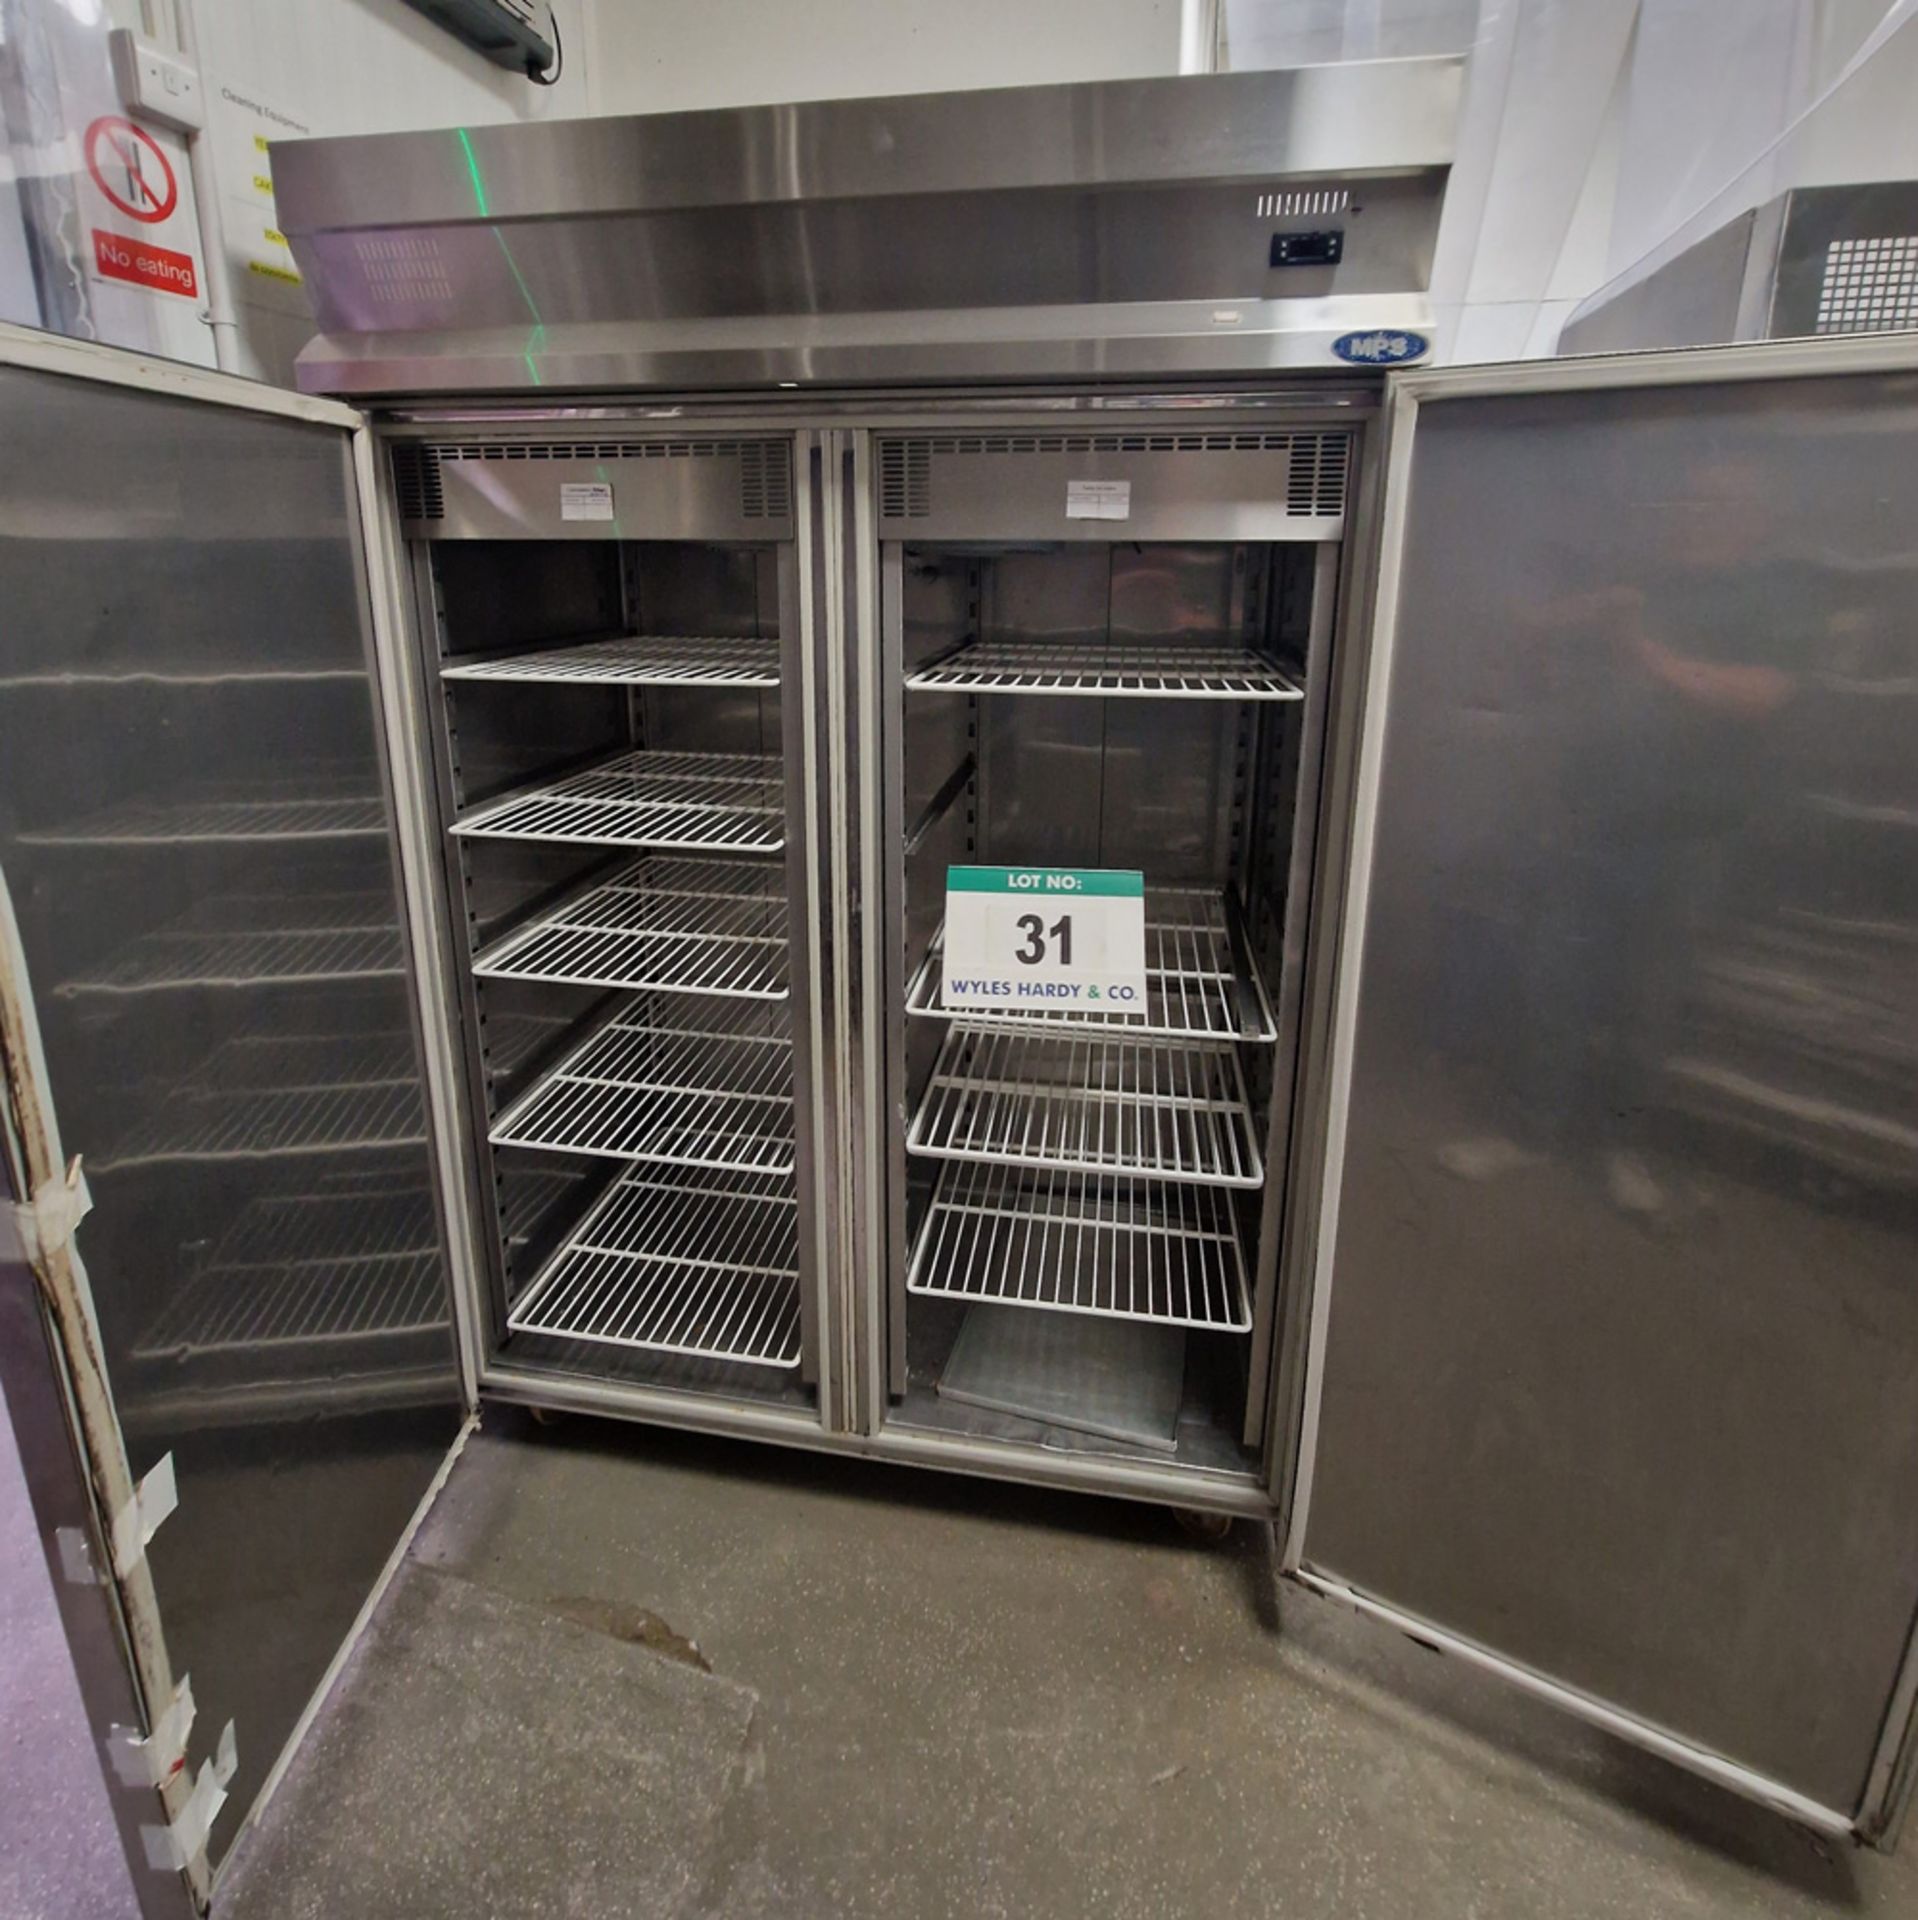 An MPS Commercial Mobile Twin Door Upright Refrigerator - Image 2 of 2